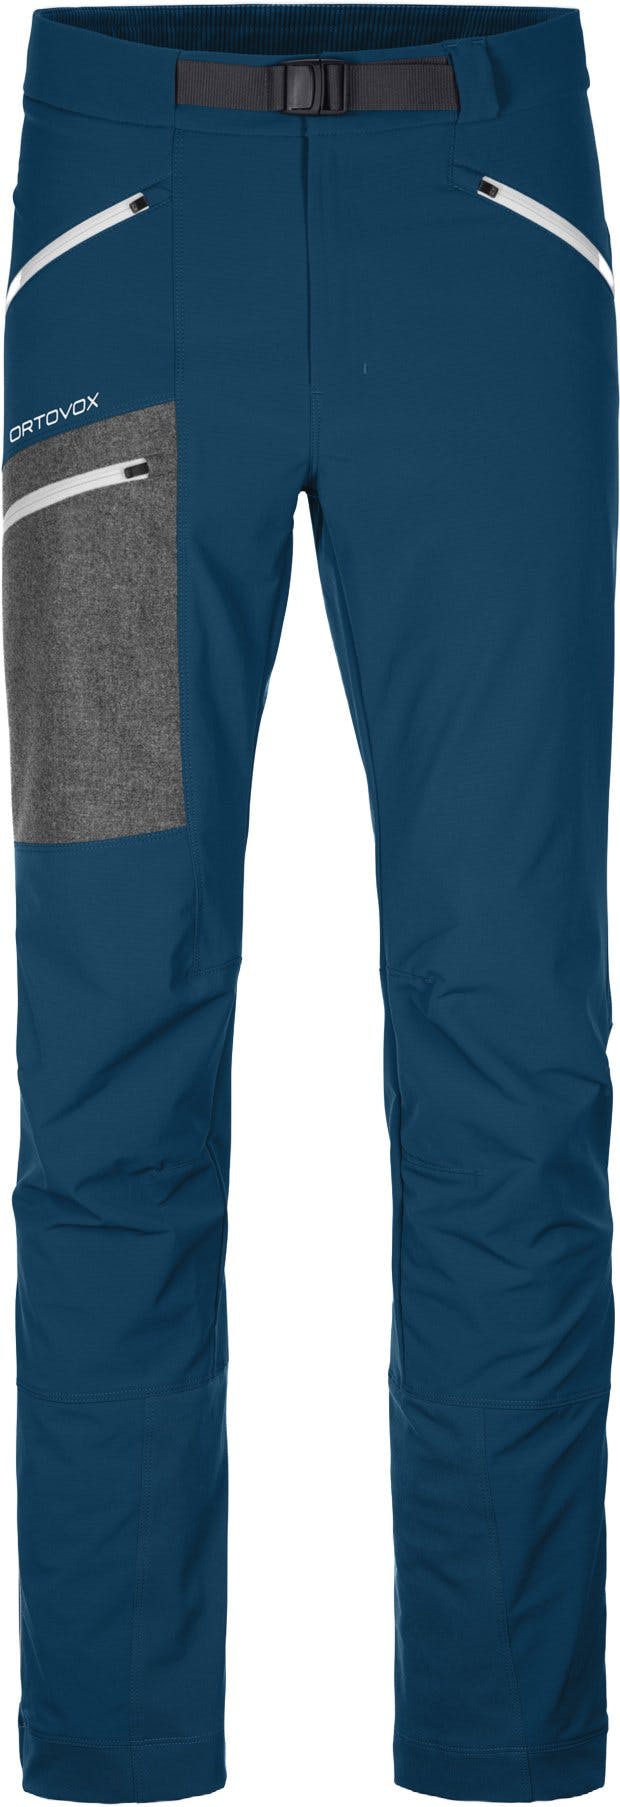 Product image for Cevedale Softshell Pants - Men's